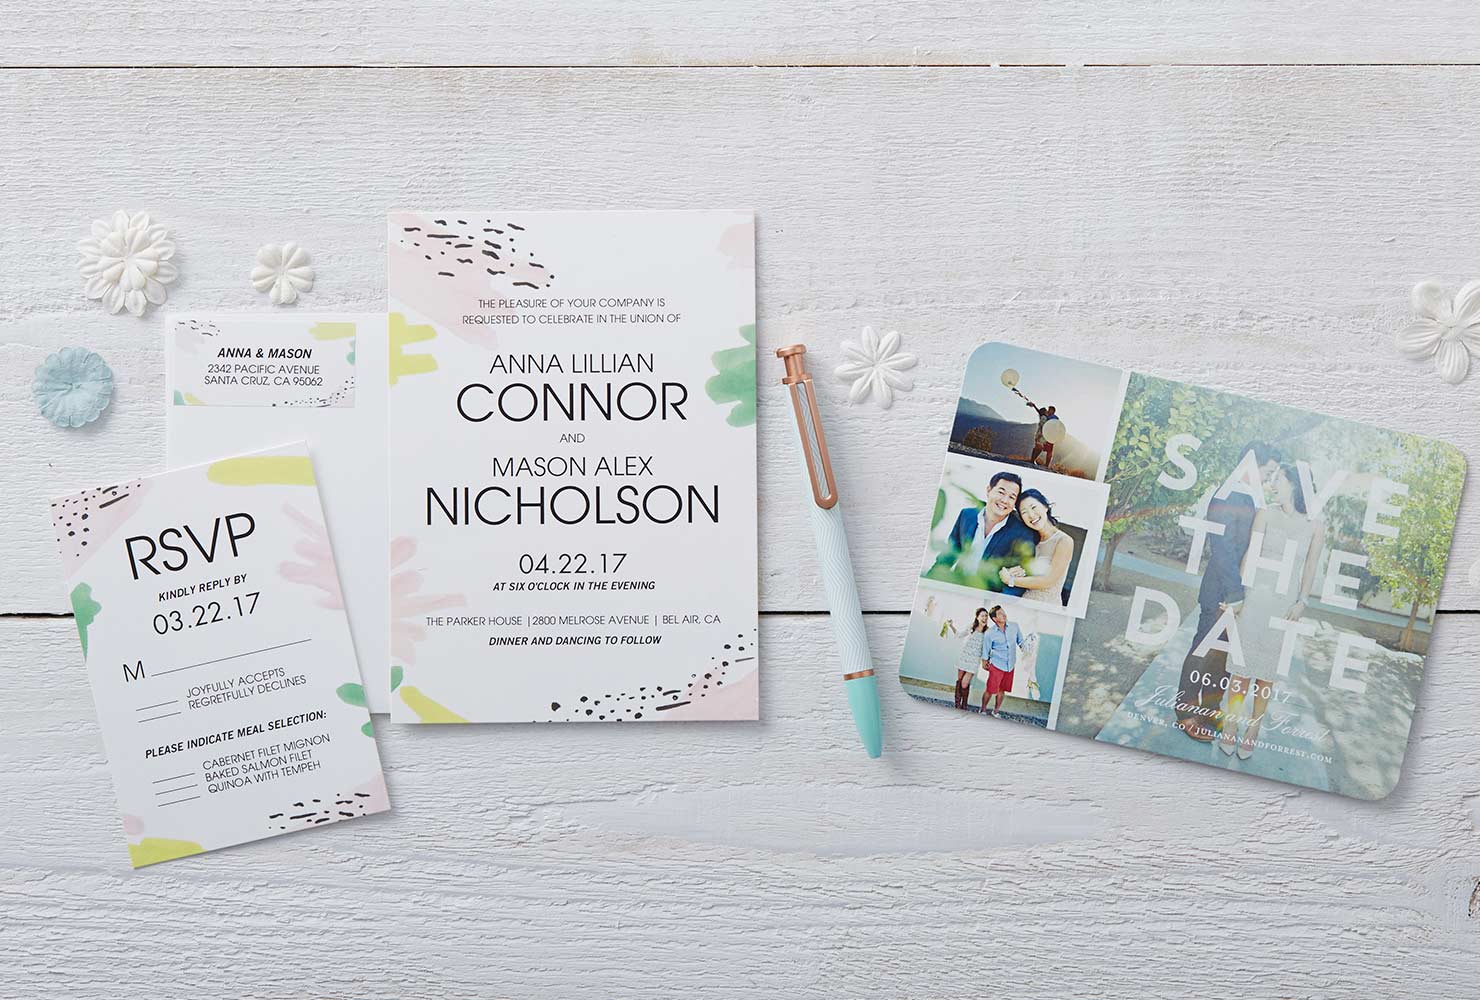 Floral and pastel wedding invitations.